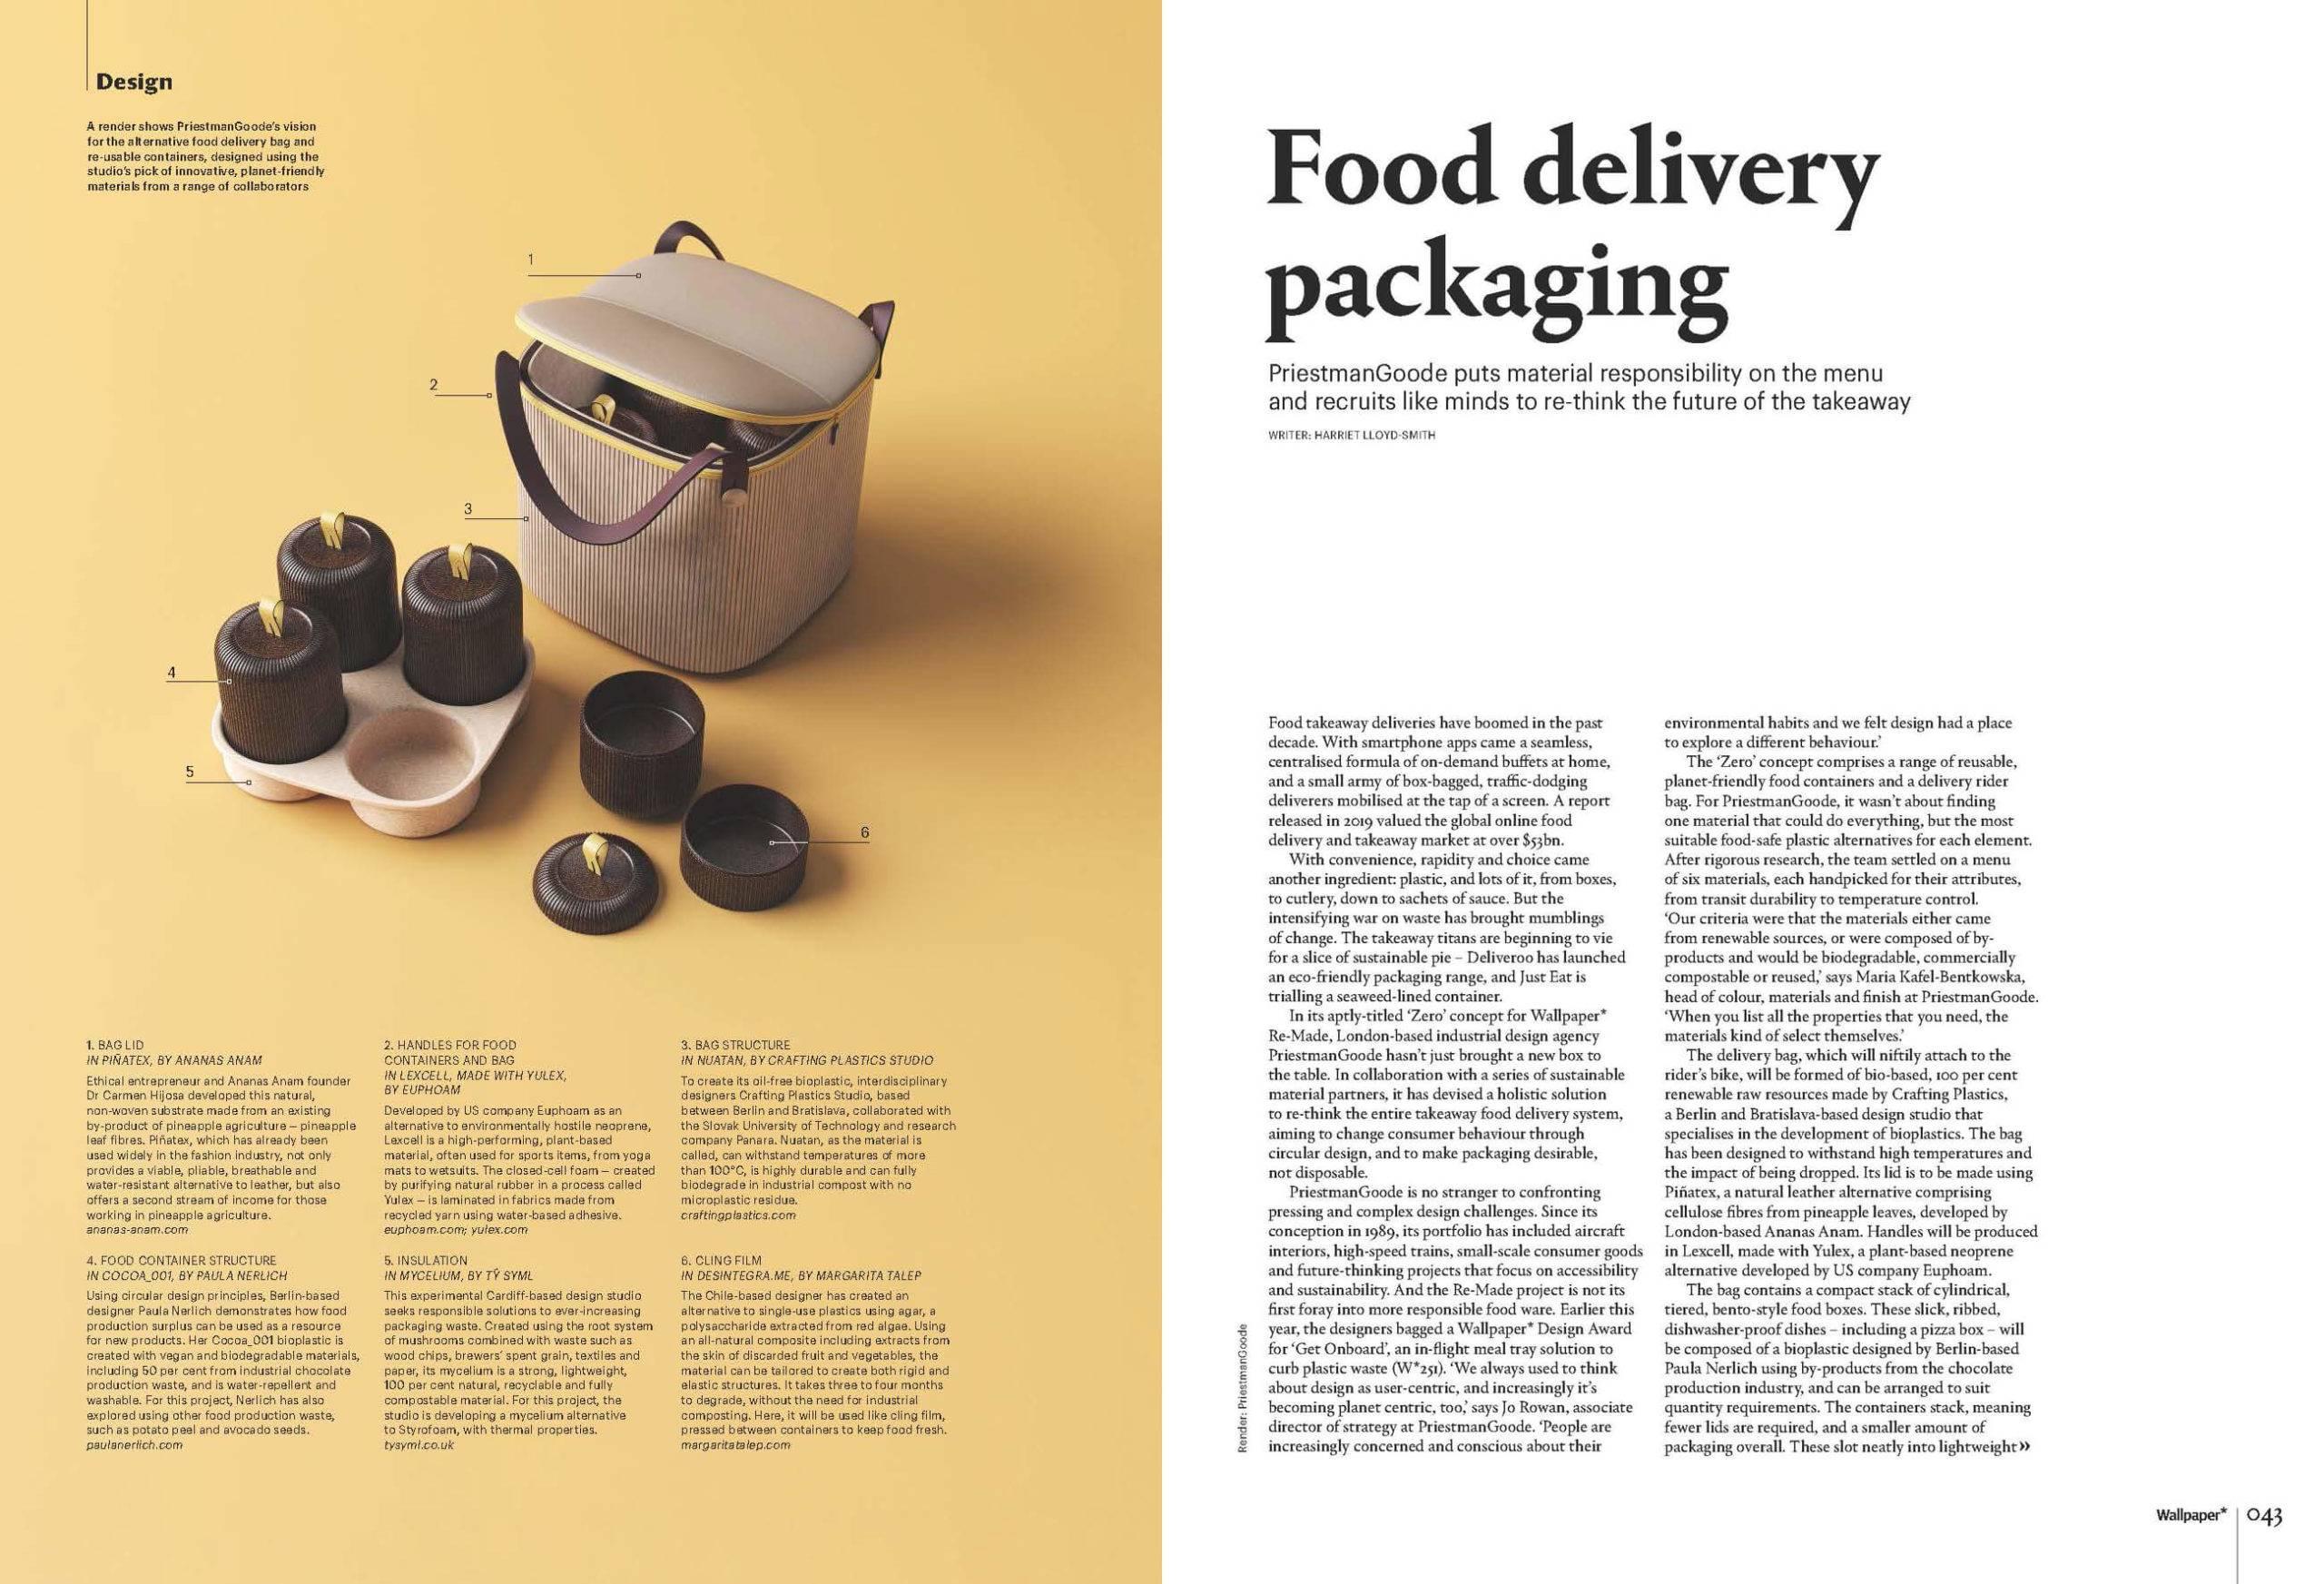 A magazine article on Food delivery packaging showcasing the Zero takeaway project